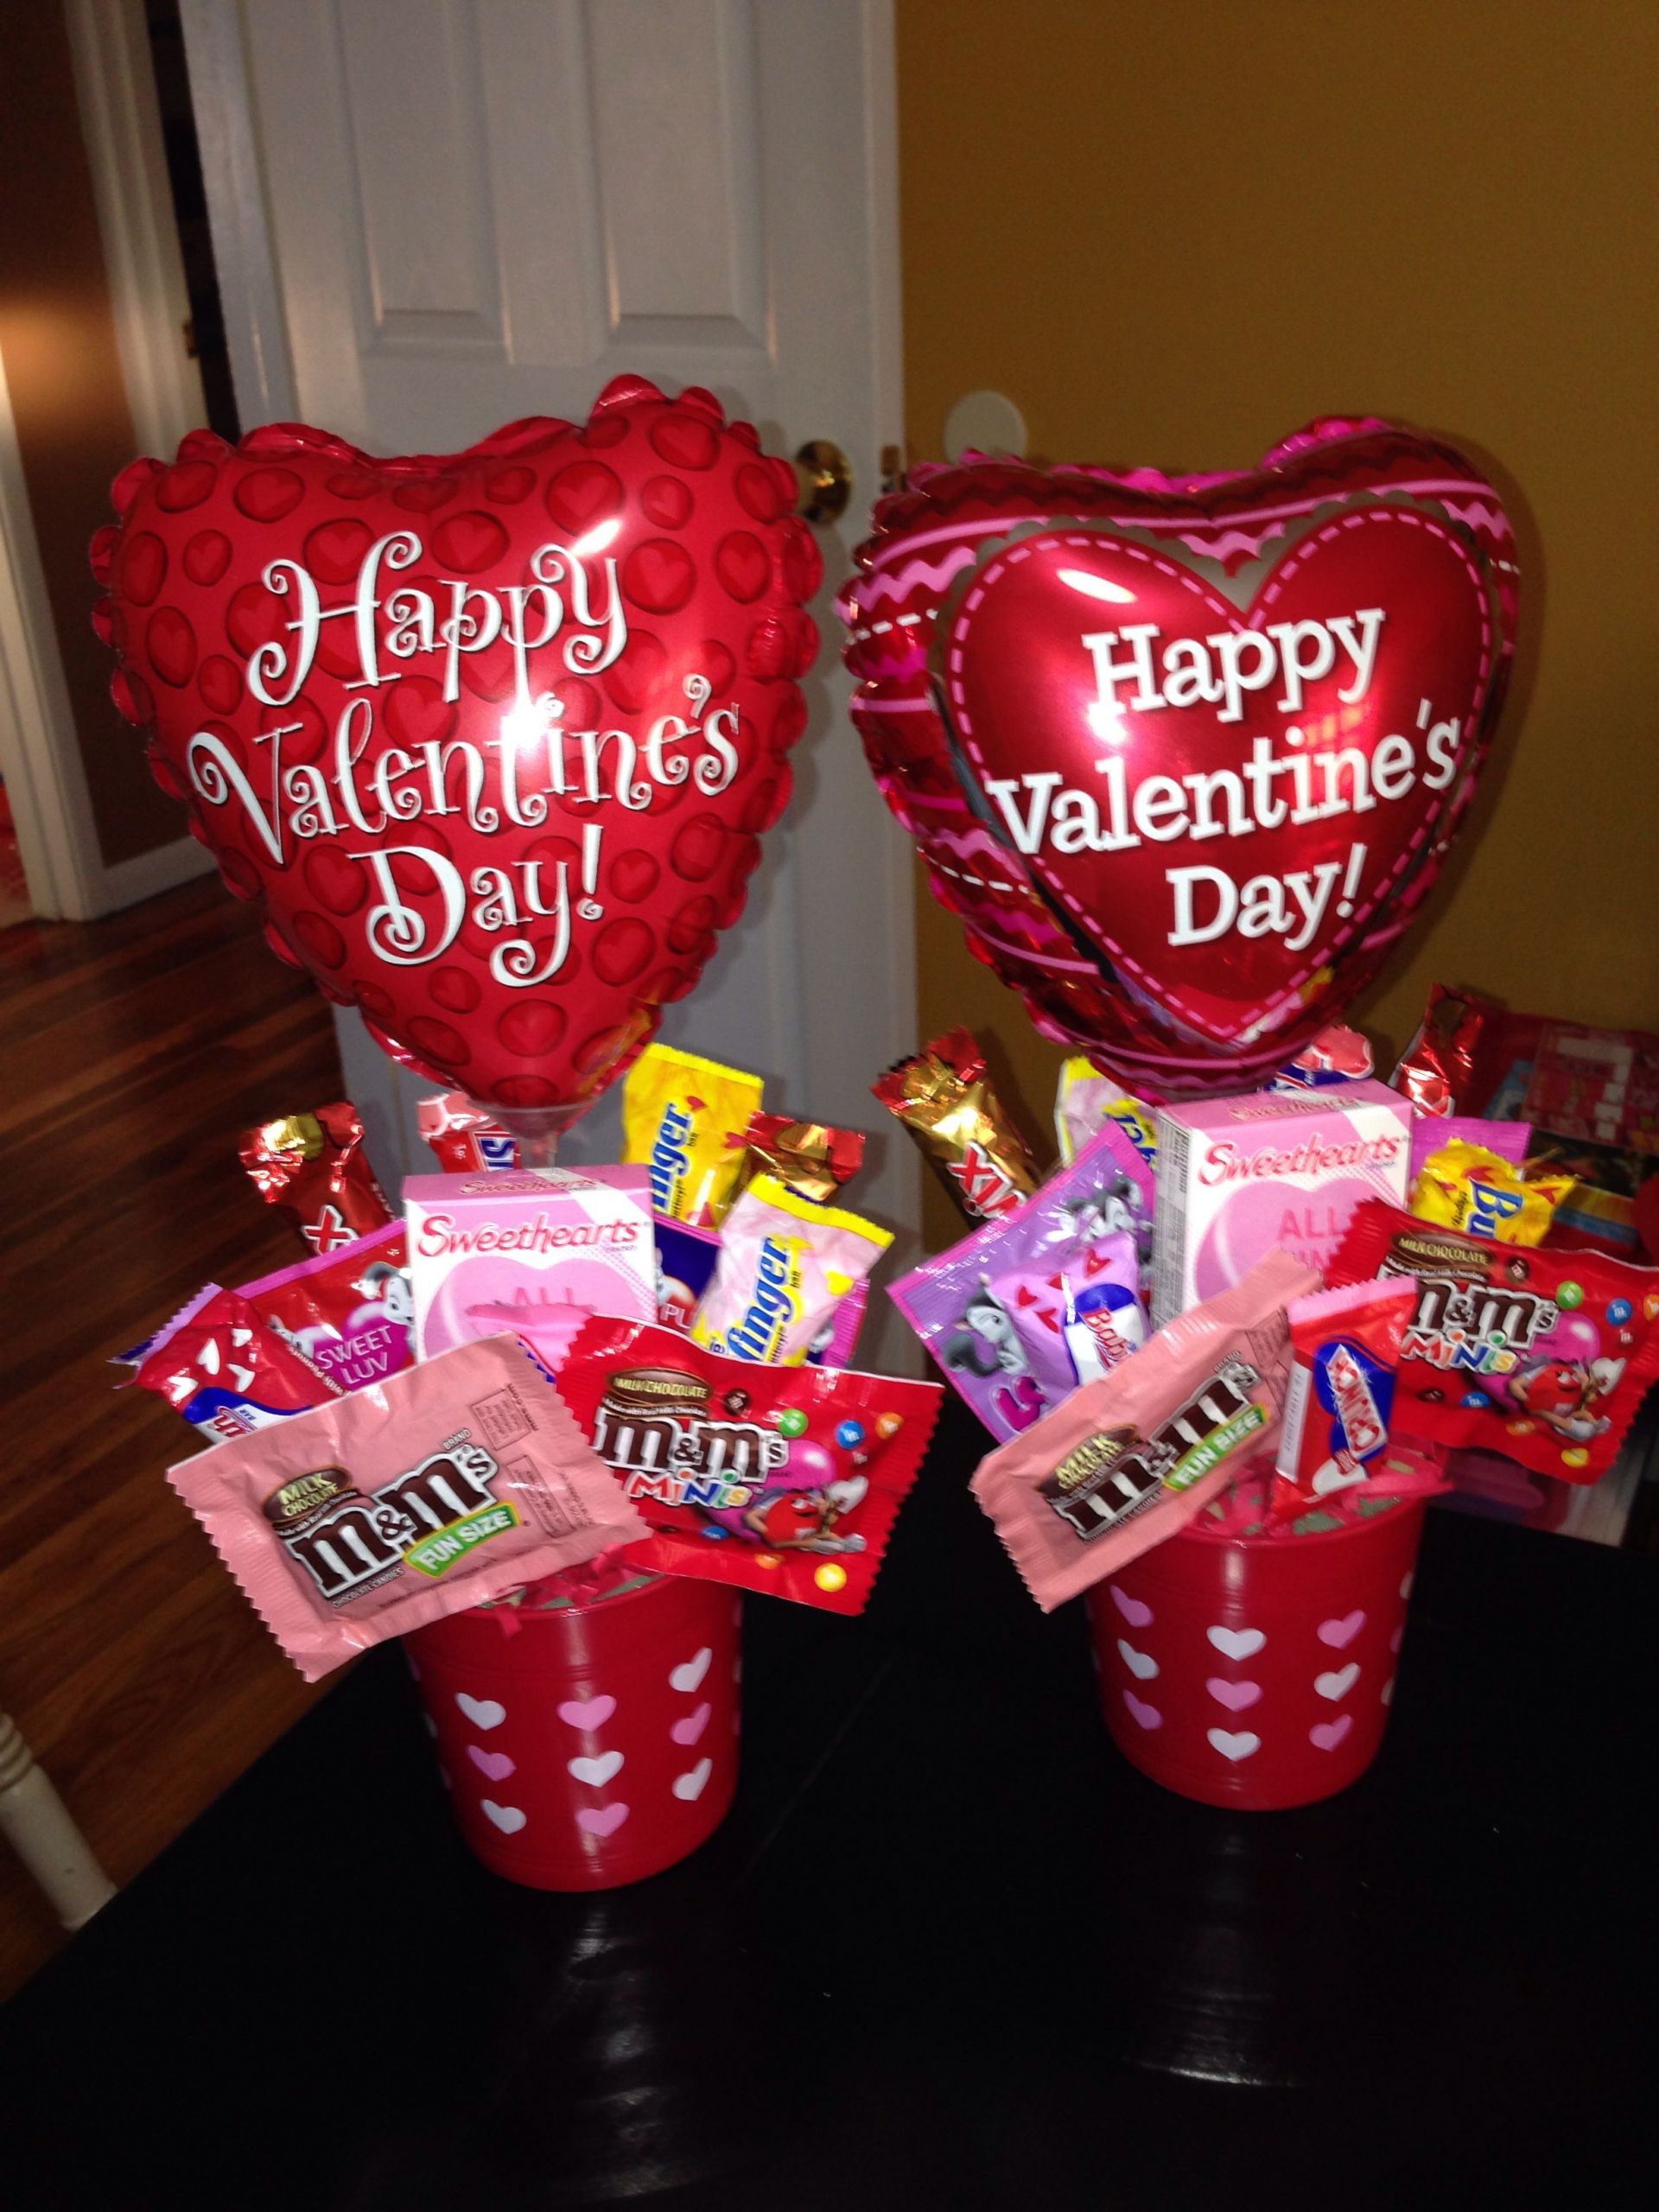 Toddler Valentines Day Gift Ideas
 Small valentines bouquets